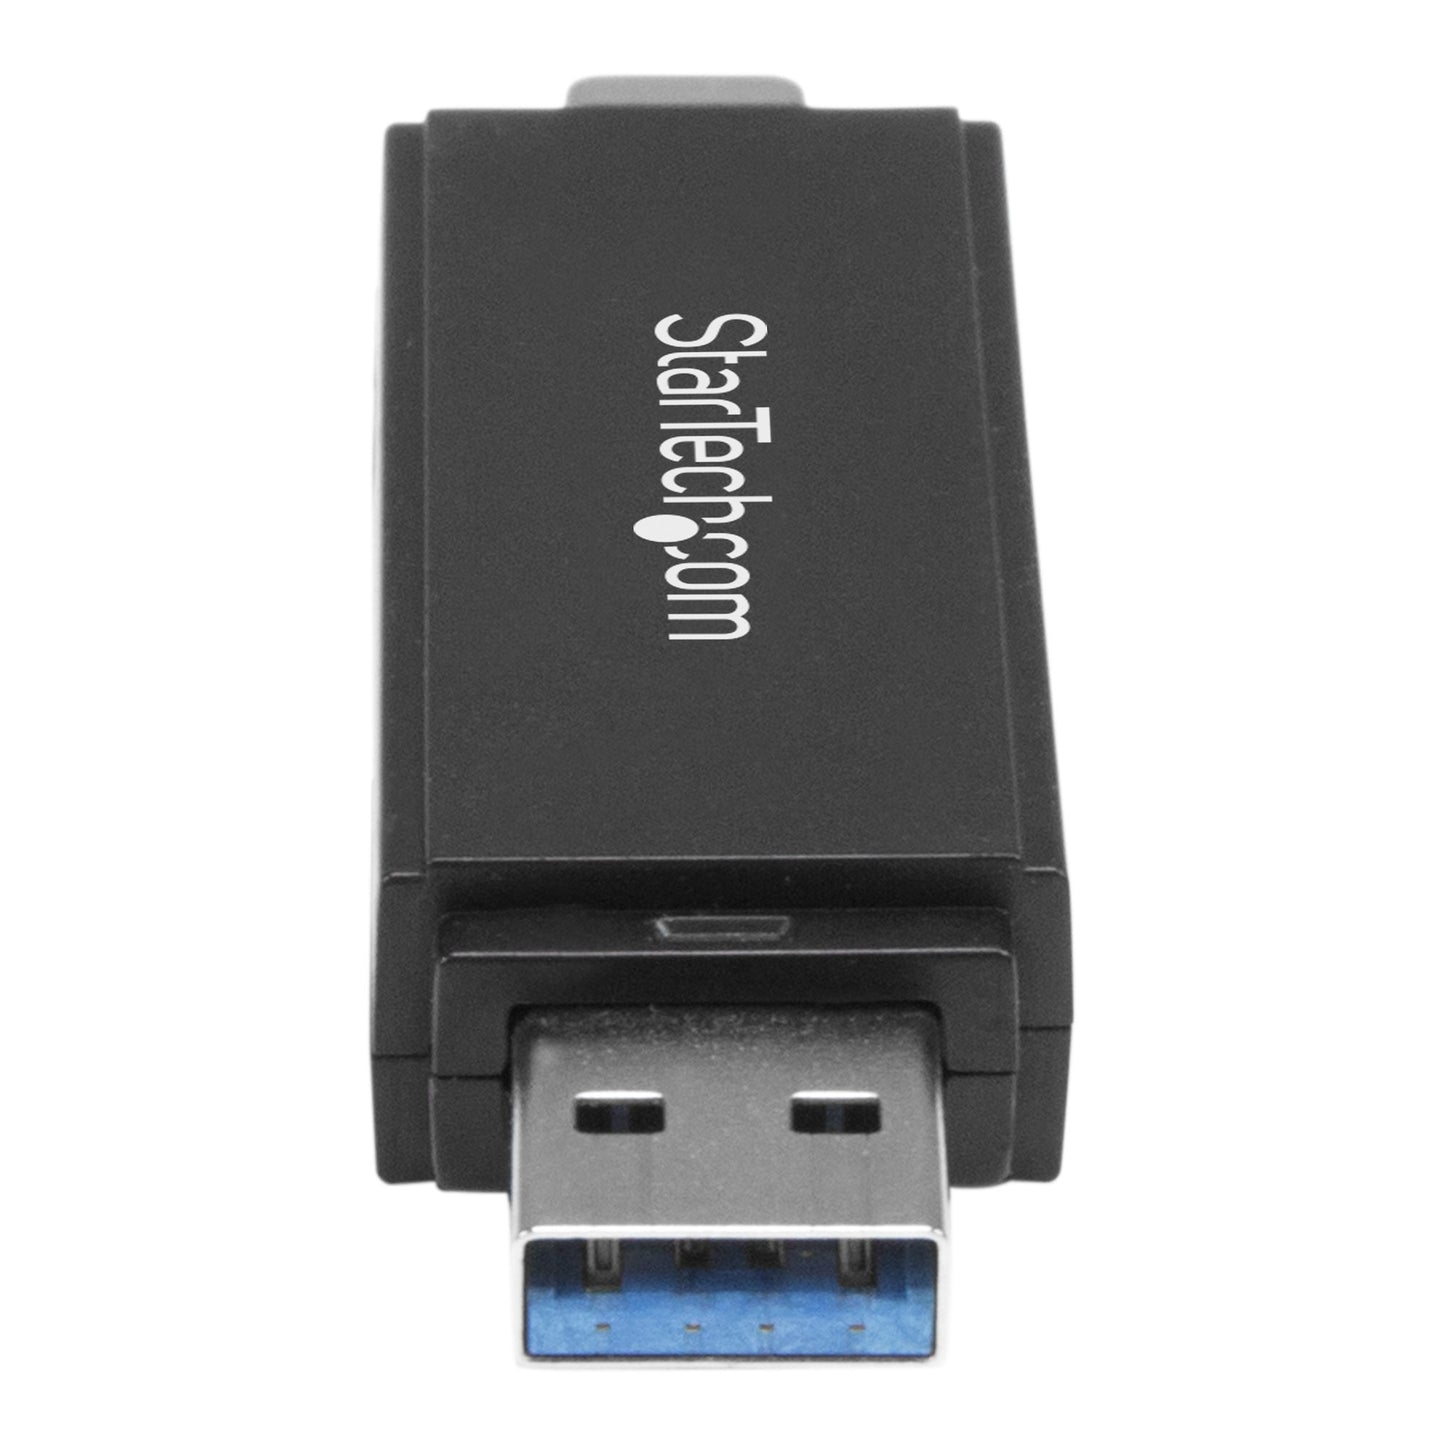 StarTech.com USB 3.0 Memory Card Reader/Writer for SD and microSD Cards - USB-C and USB-A-3